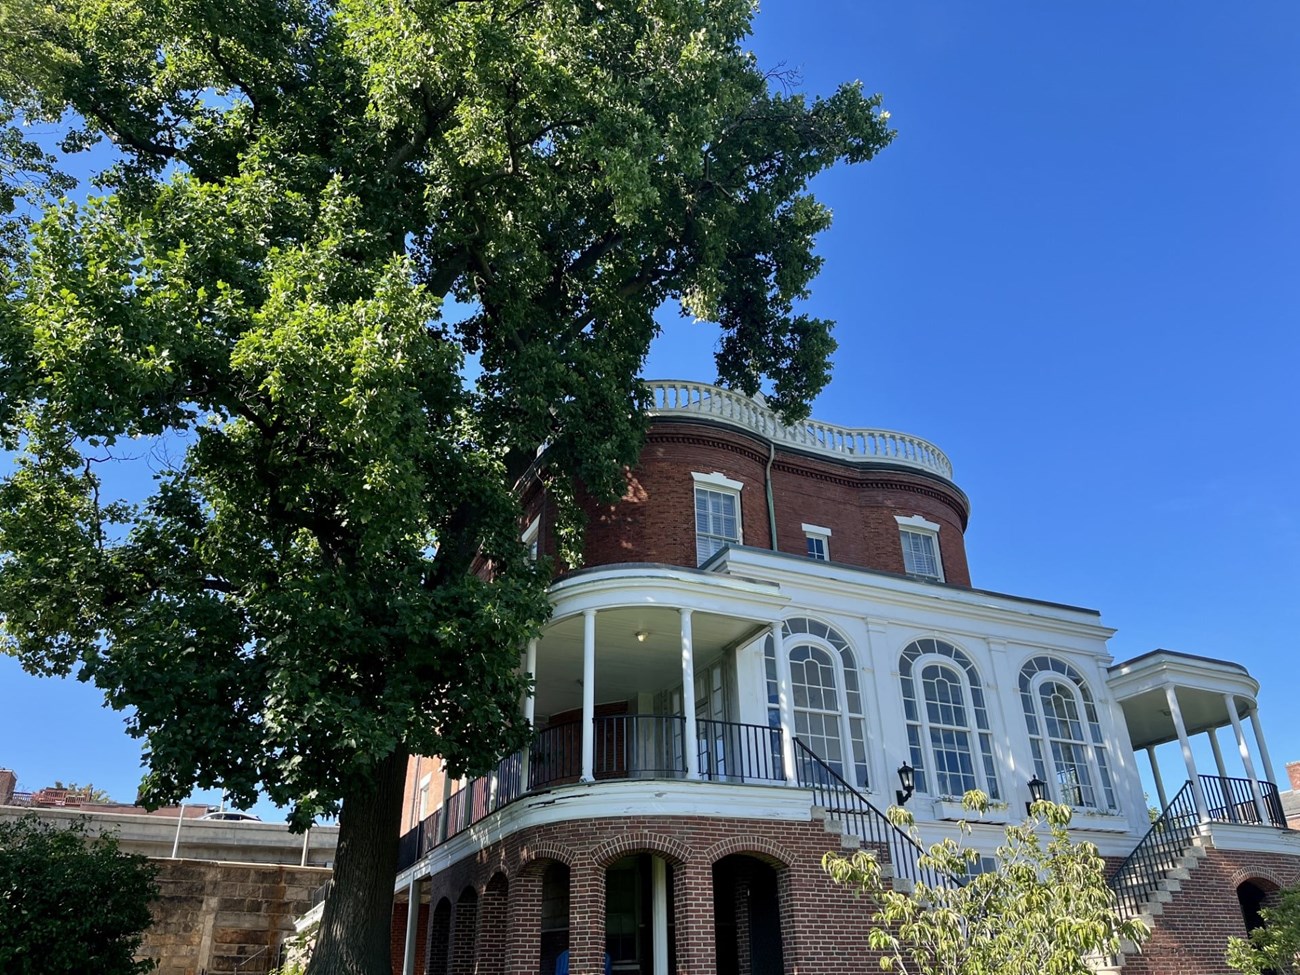 A large Tuliptree with green, broad leaves towers over a 19th century-era three story brick building, situated to the right of the tree.